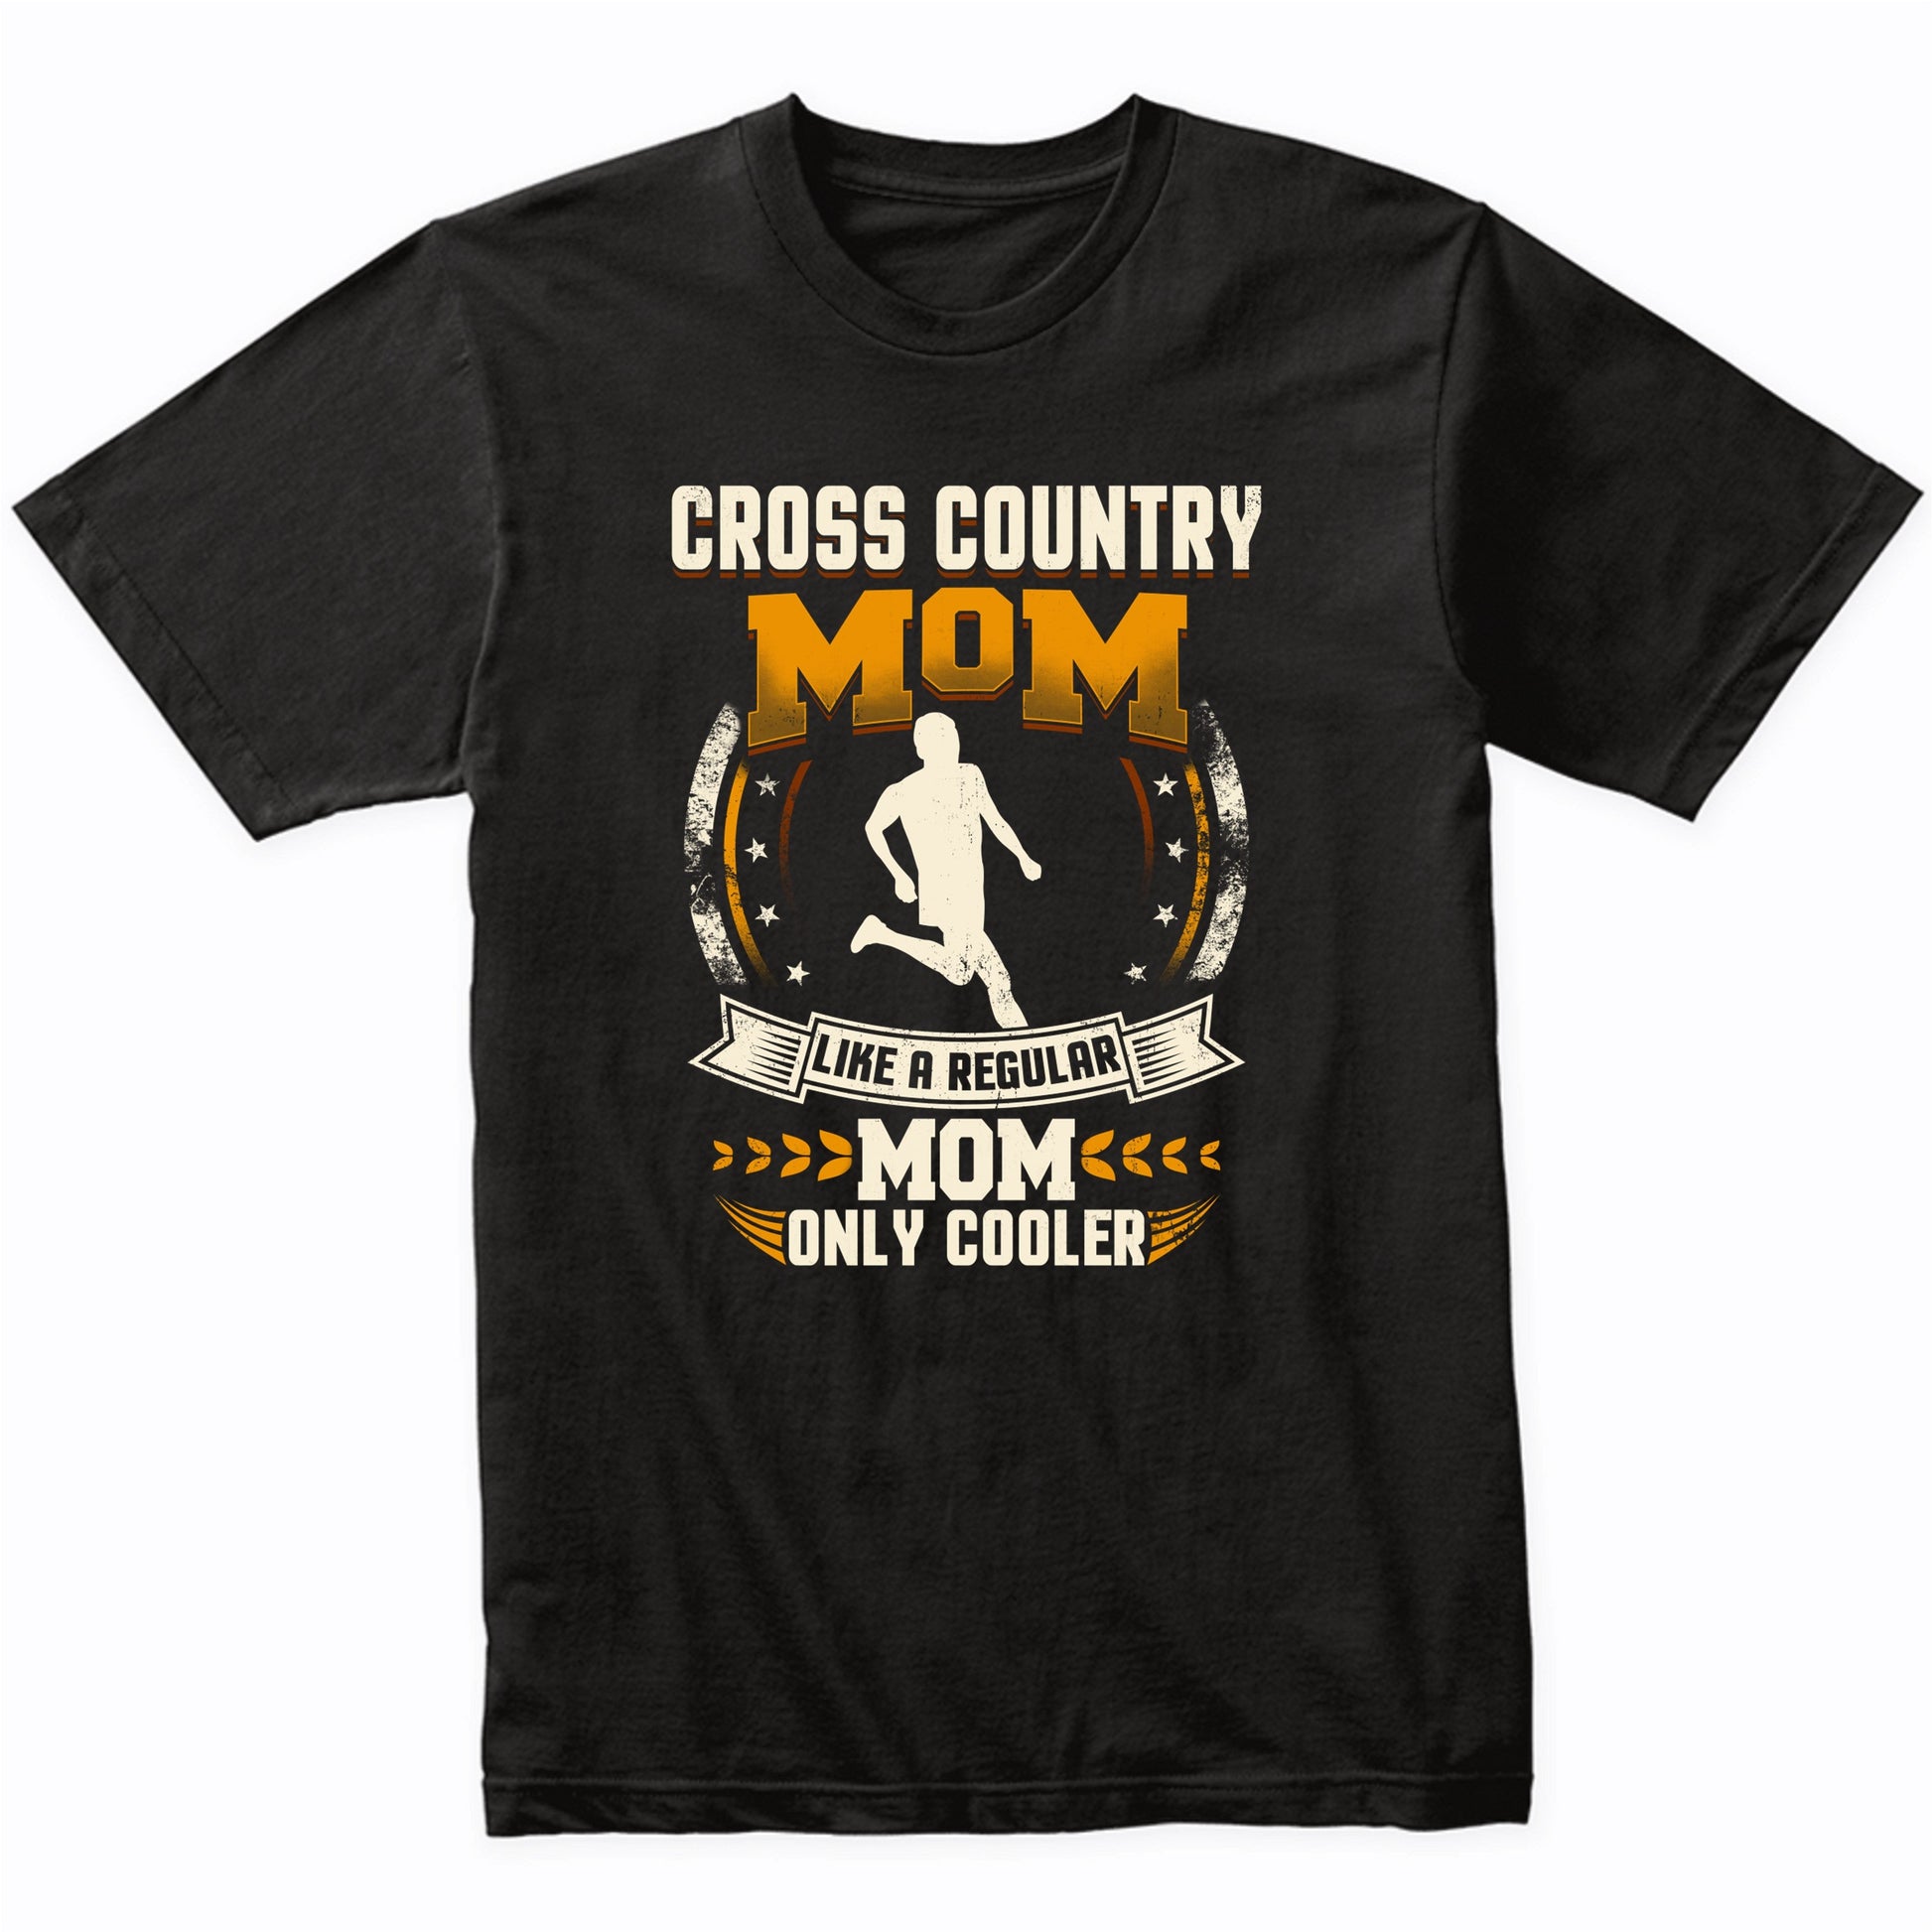 Cross Country Mom Like A Regular Mom Only Cooler Funny T-Shirt